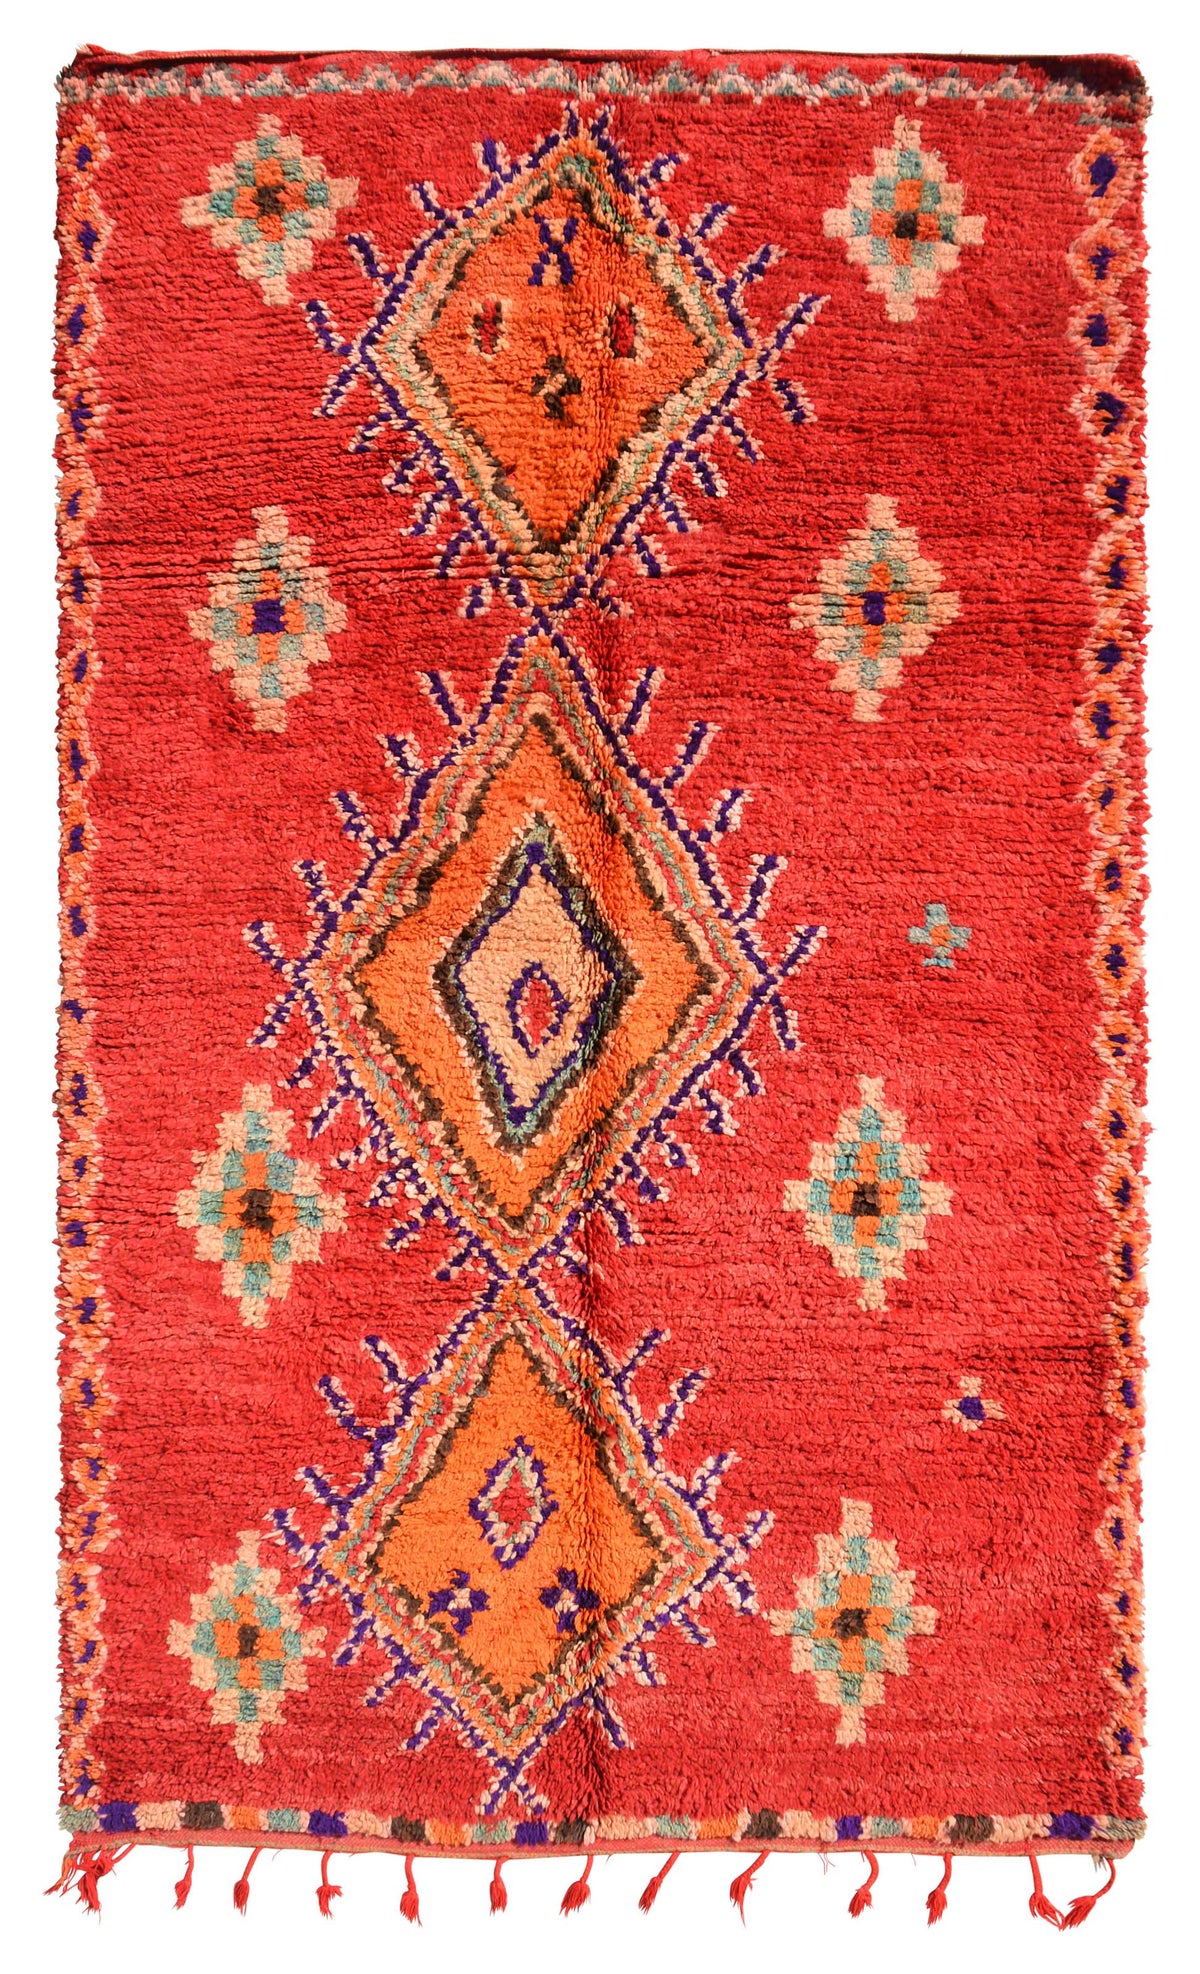 Vintage Moroccan Rug Vintage Inspired Rugs - Red And Pink Rug - Illuminate Collective illuminate collective